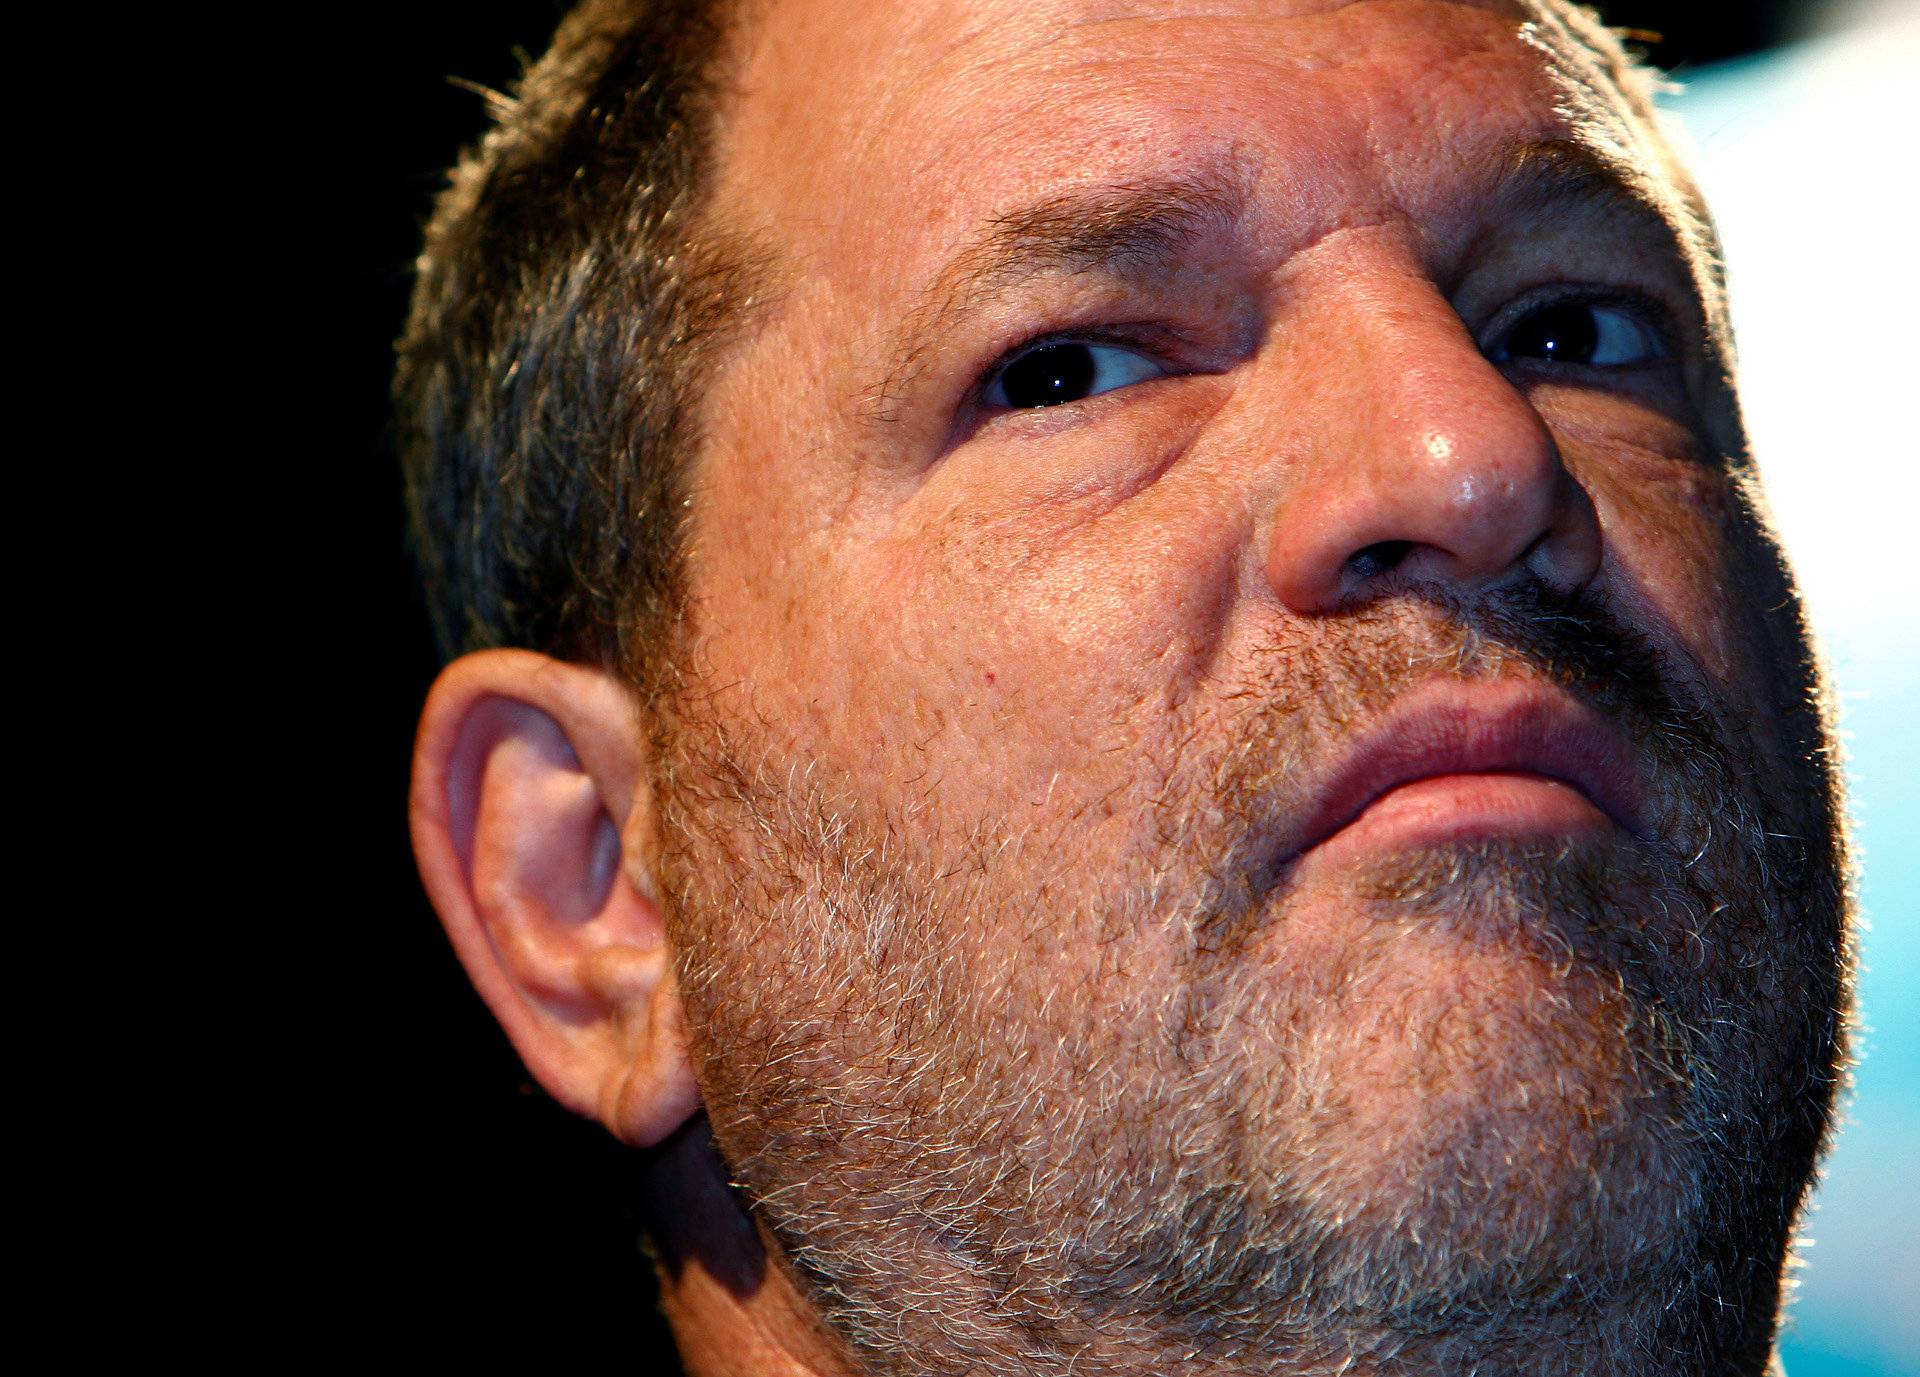 FILE PHOTO: Harvey Weinstein, Co-Chairman of the Weinstein Company, attends the inaugural Middle East International Film Festival in Abu Dhabi